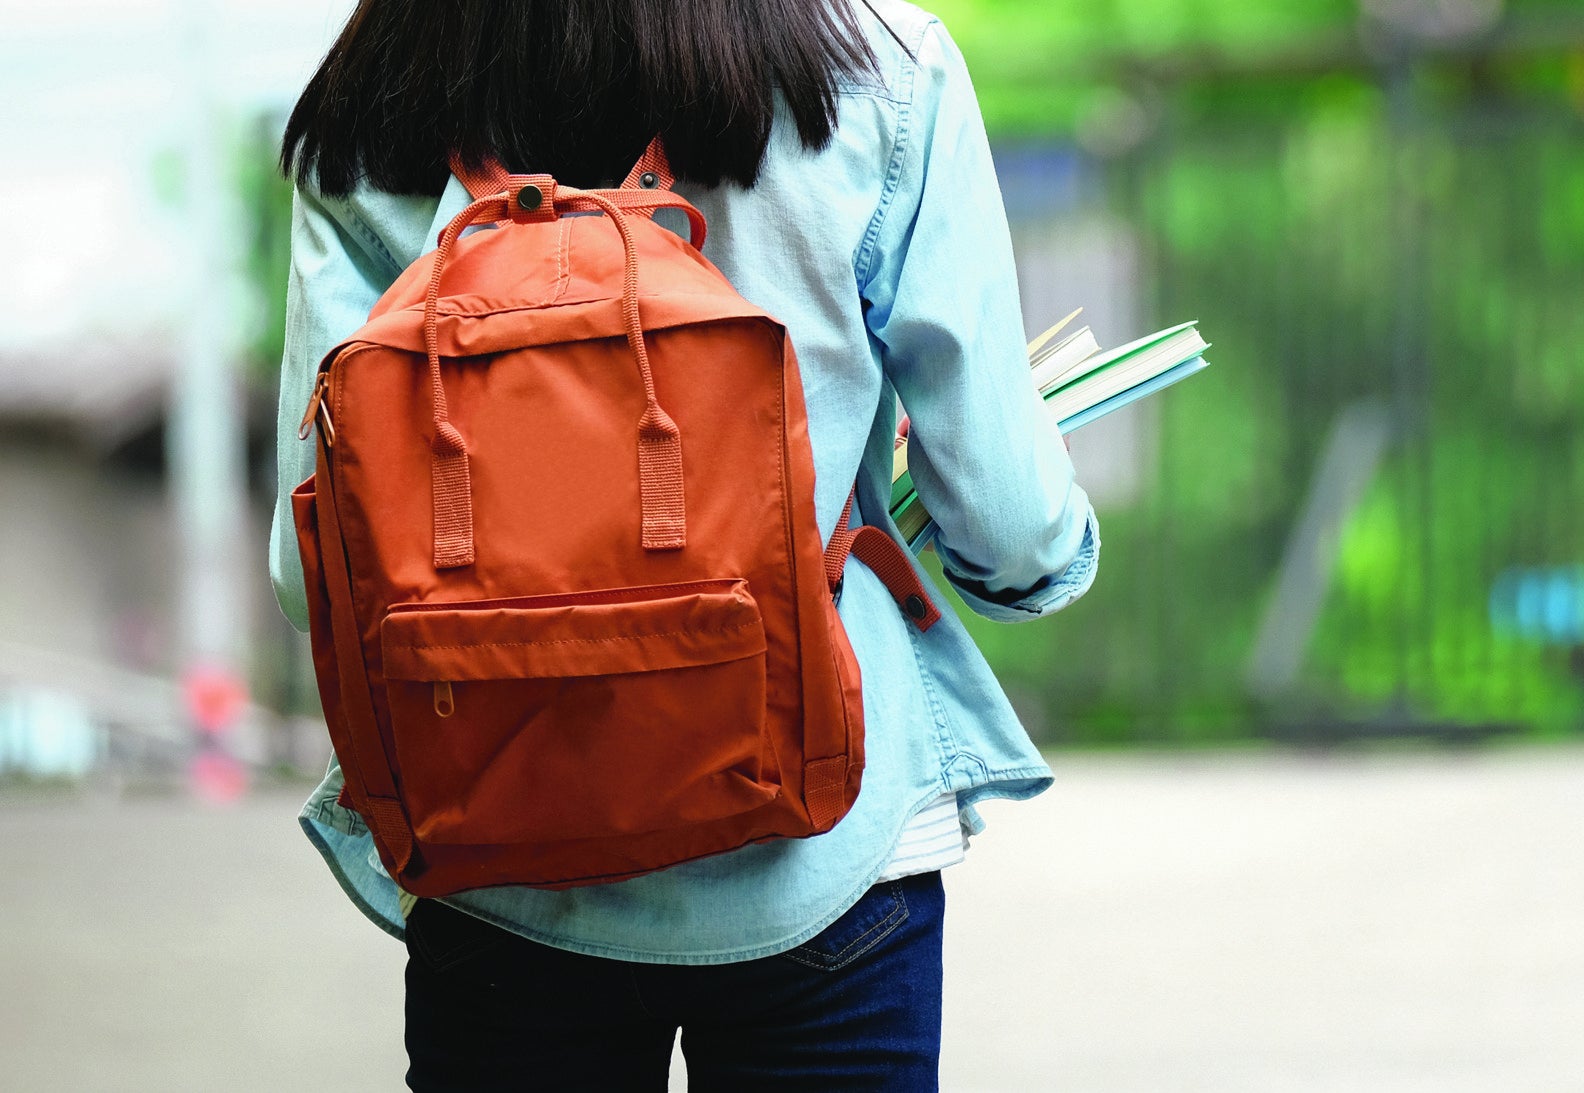 An Asian student stands alone, wearing their backpack and holding books